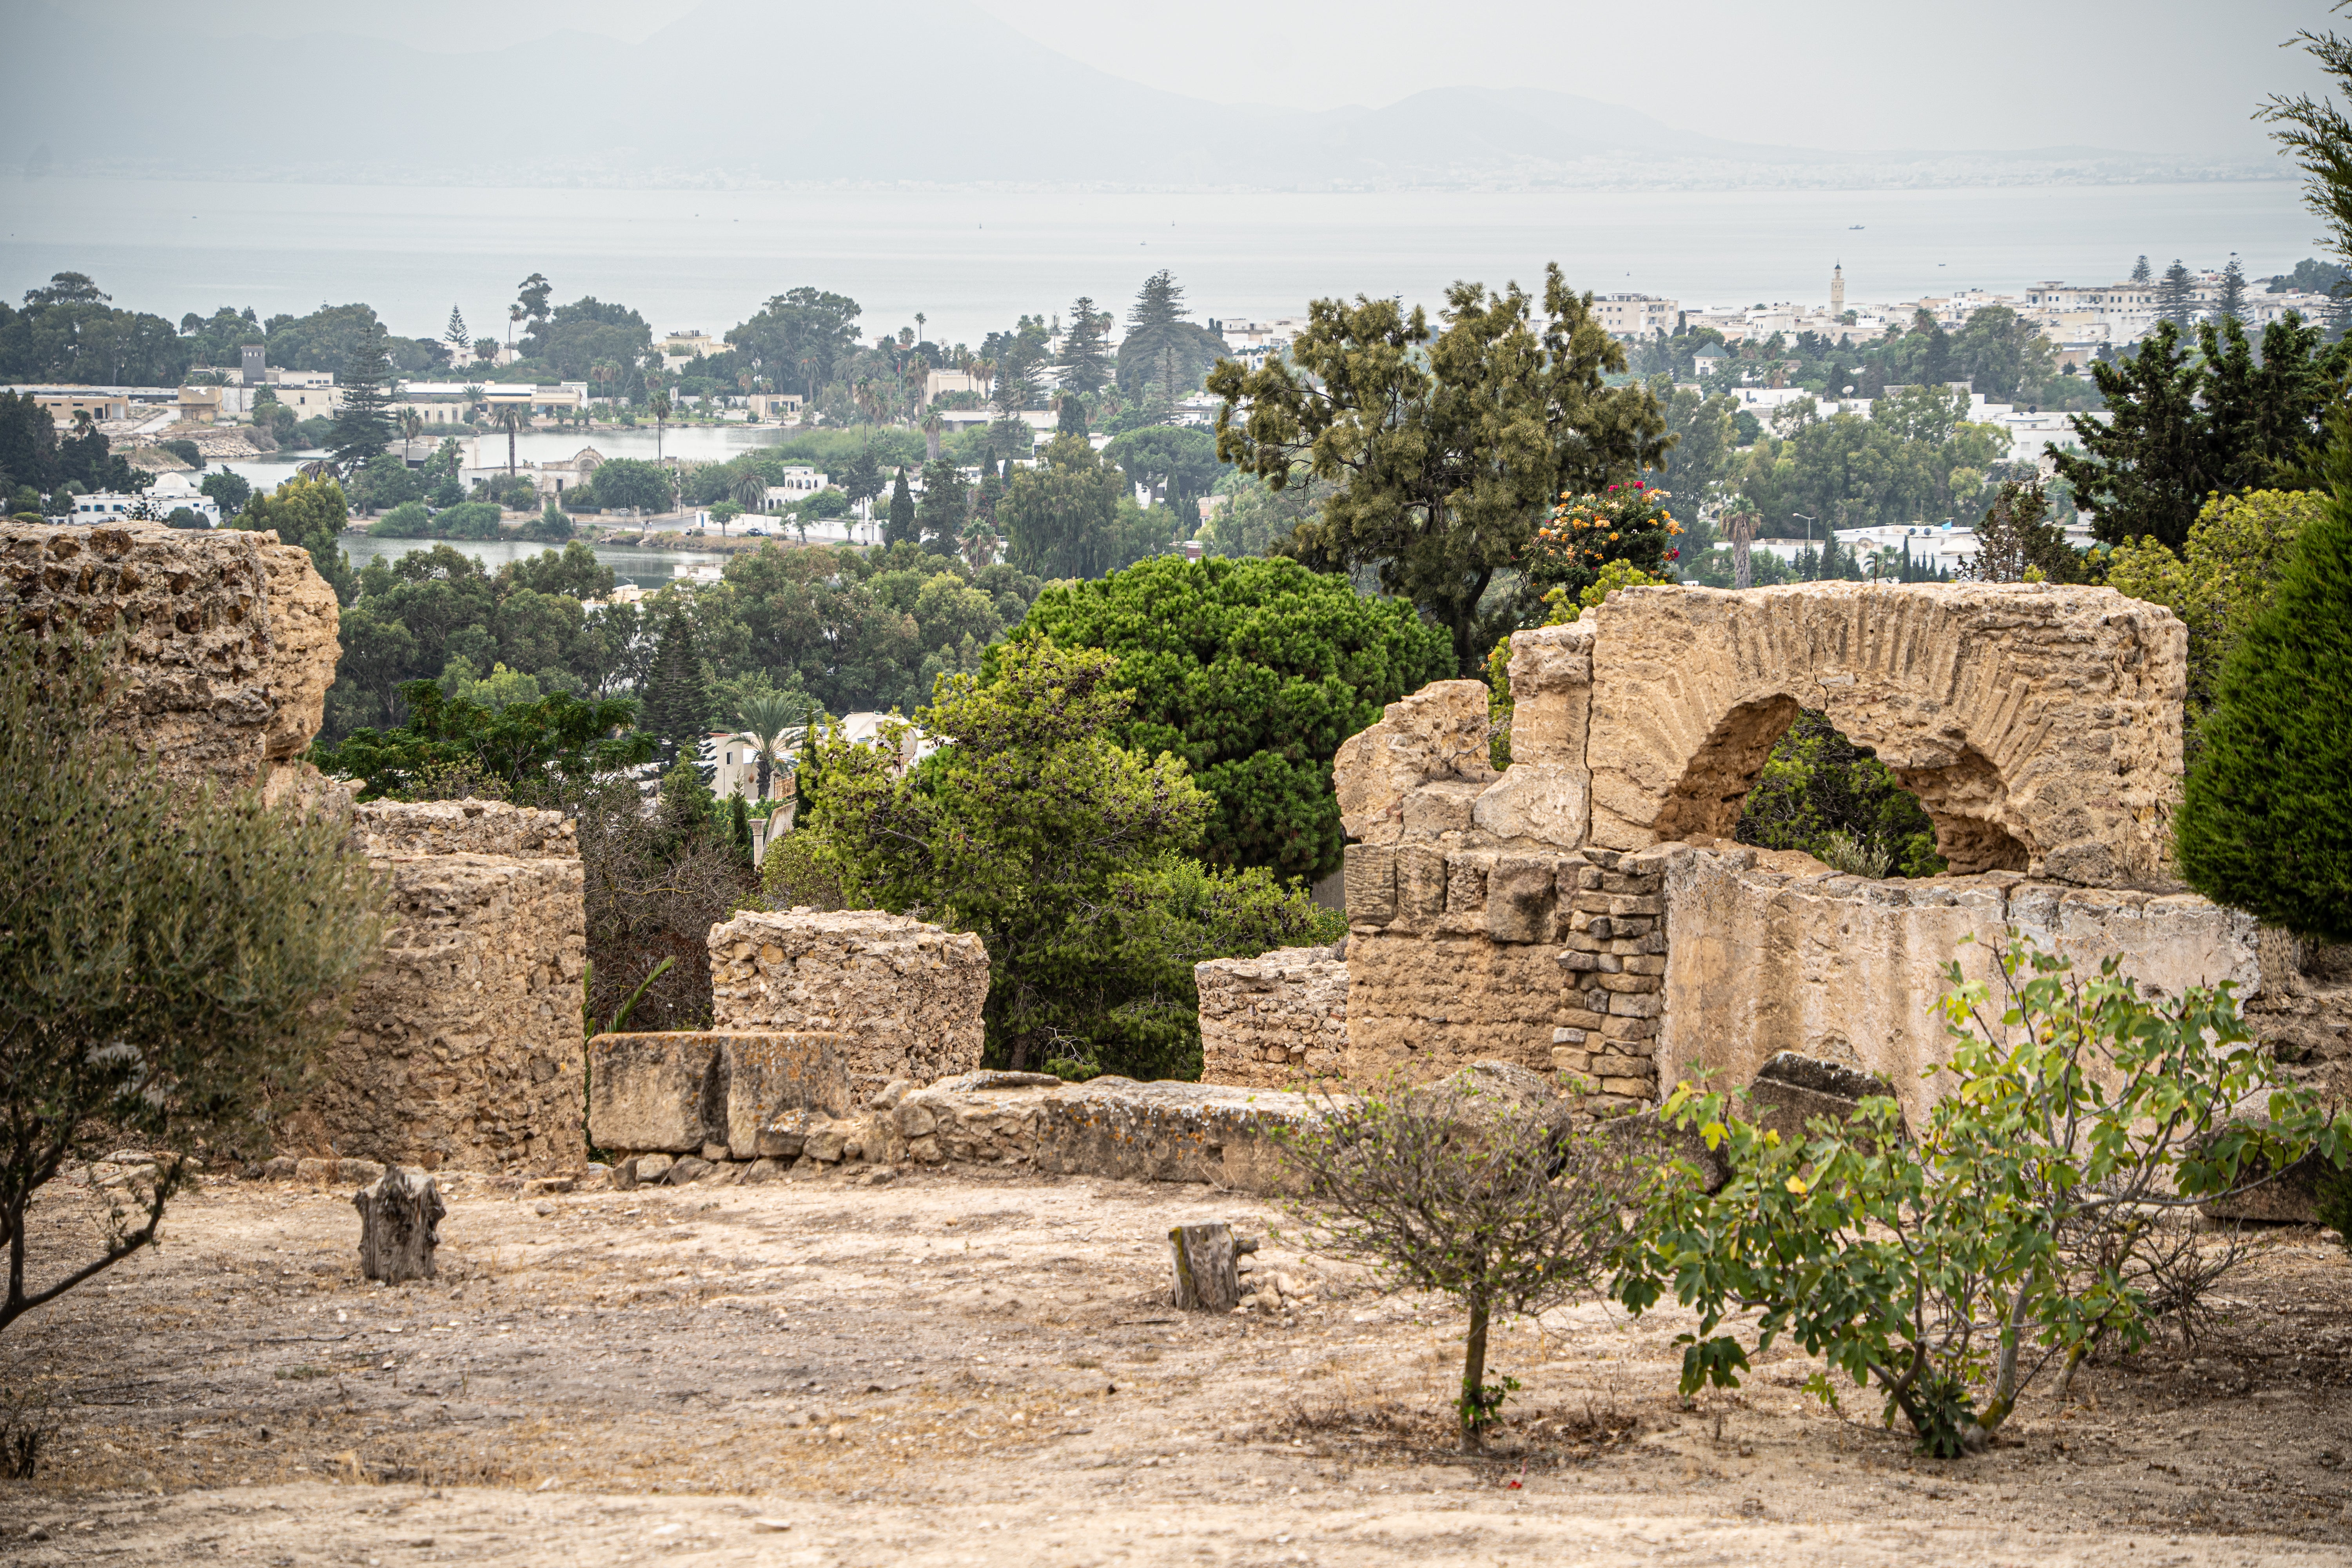 Carthage National Museum is being redeveloped into a state-of-the-art visitor attraction